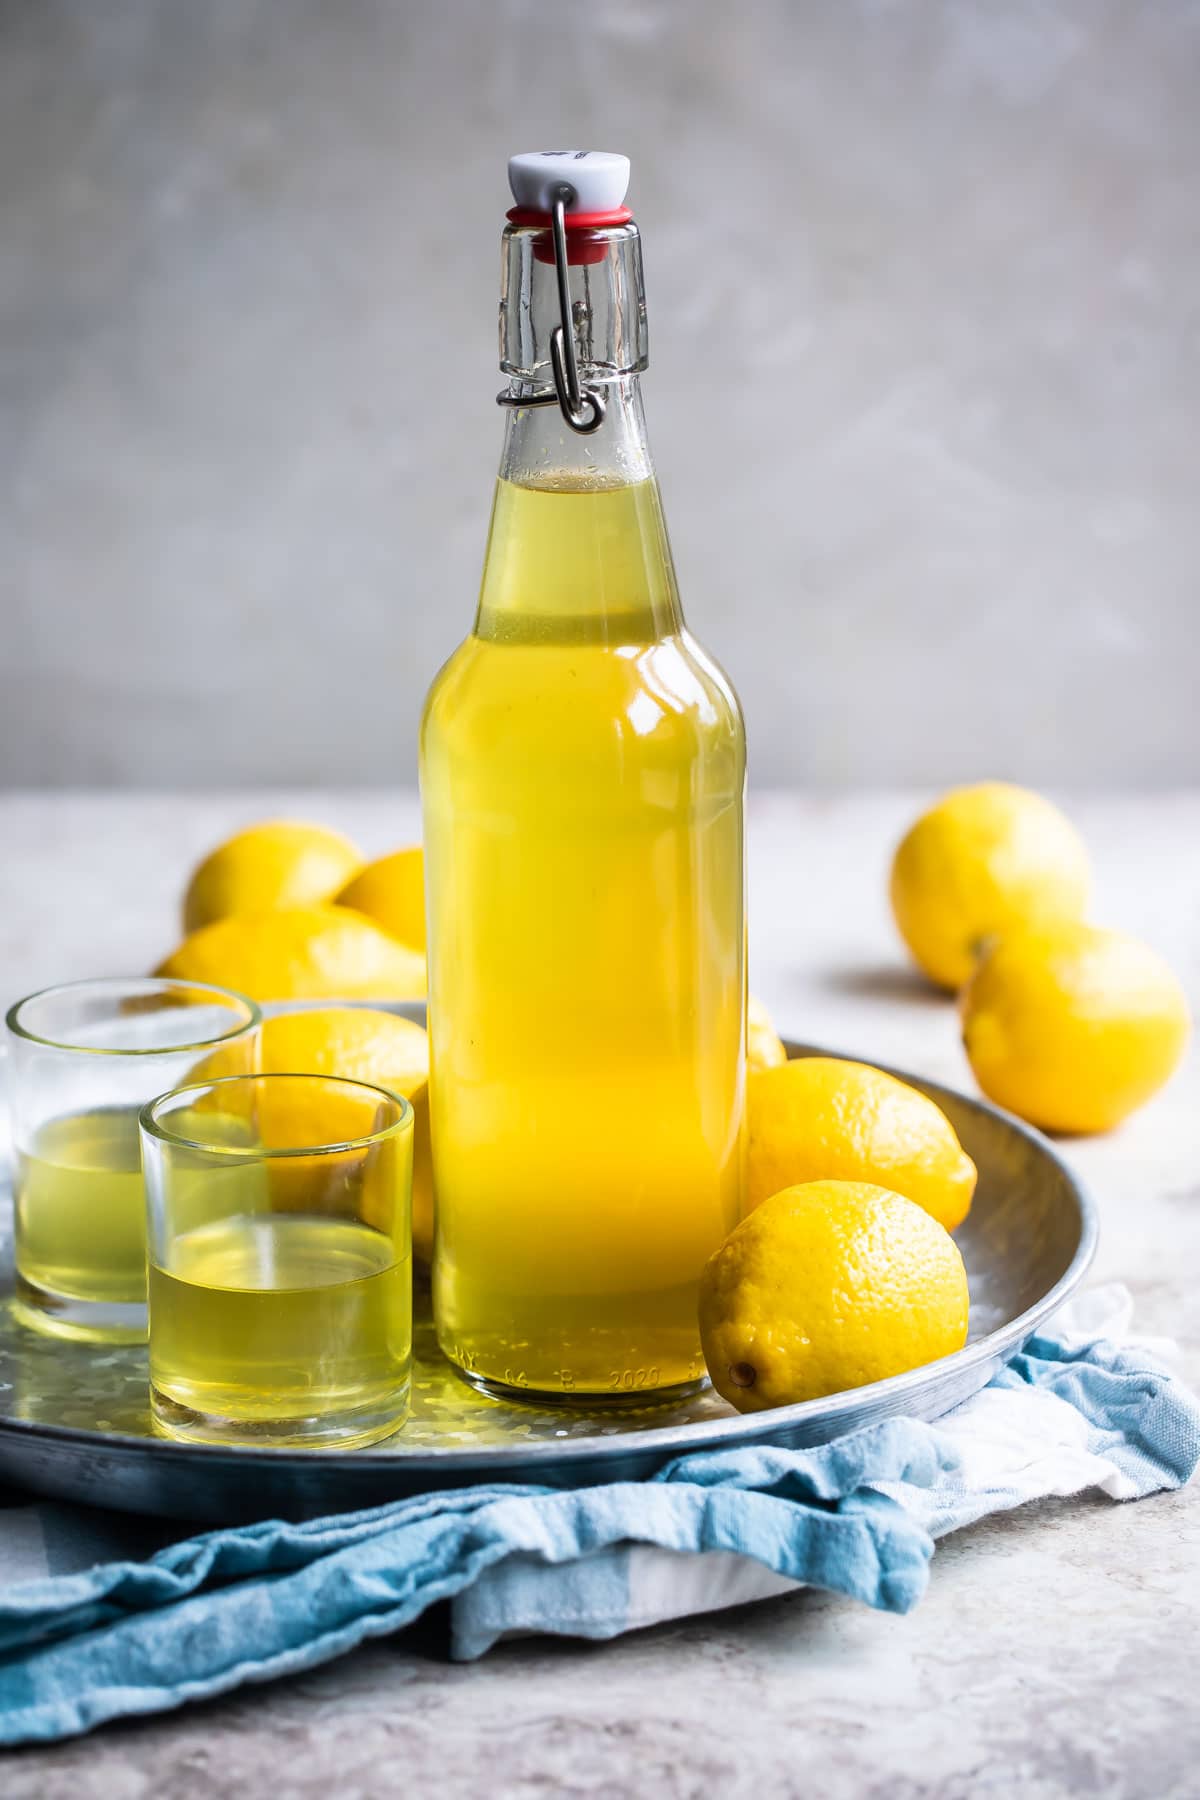 A glass bottle full of Limoncello.